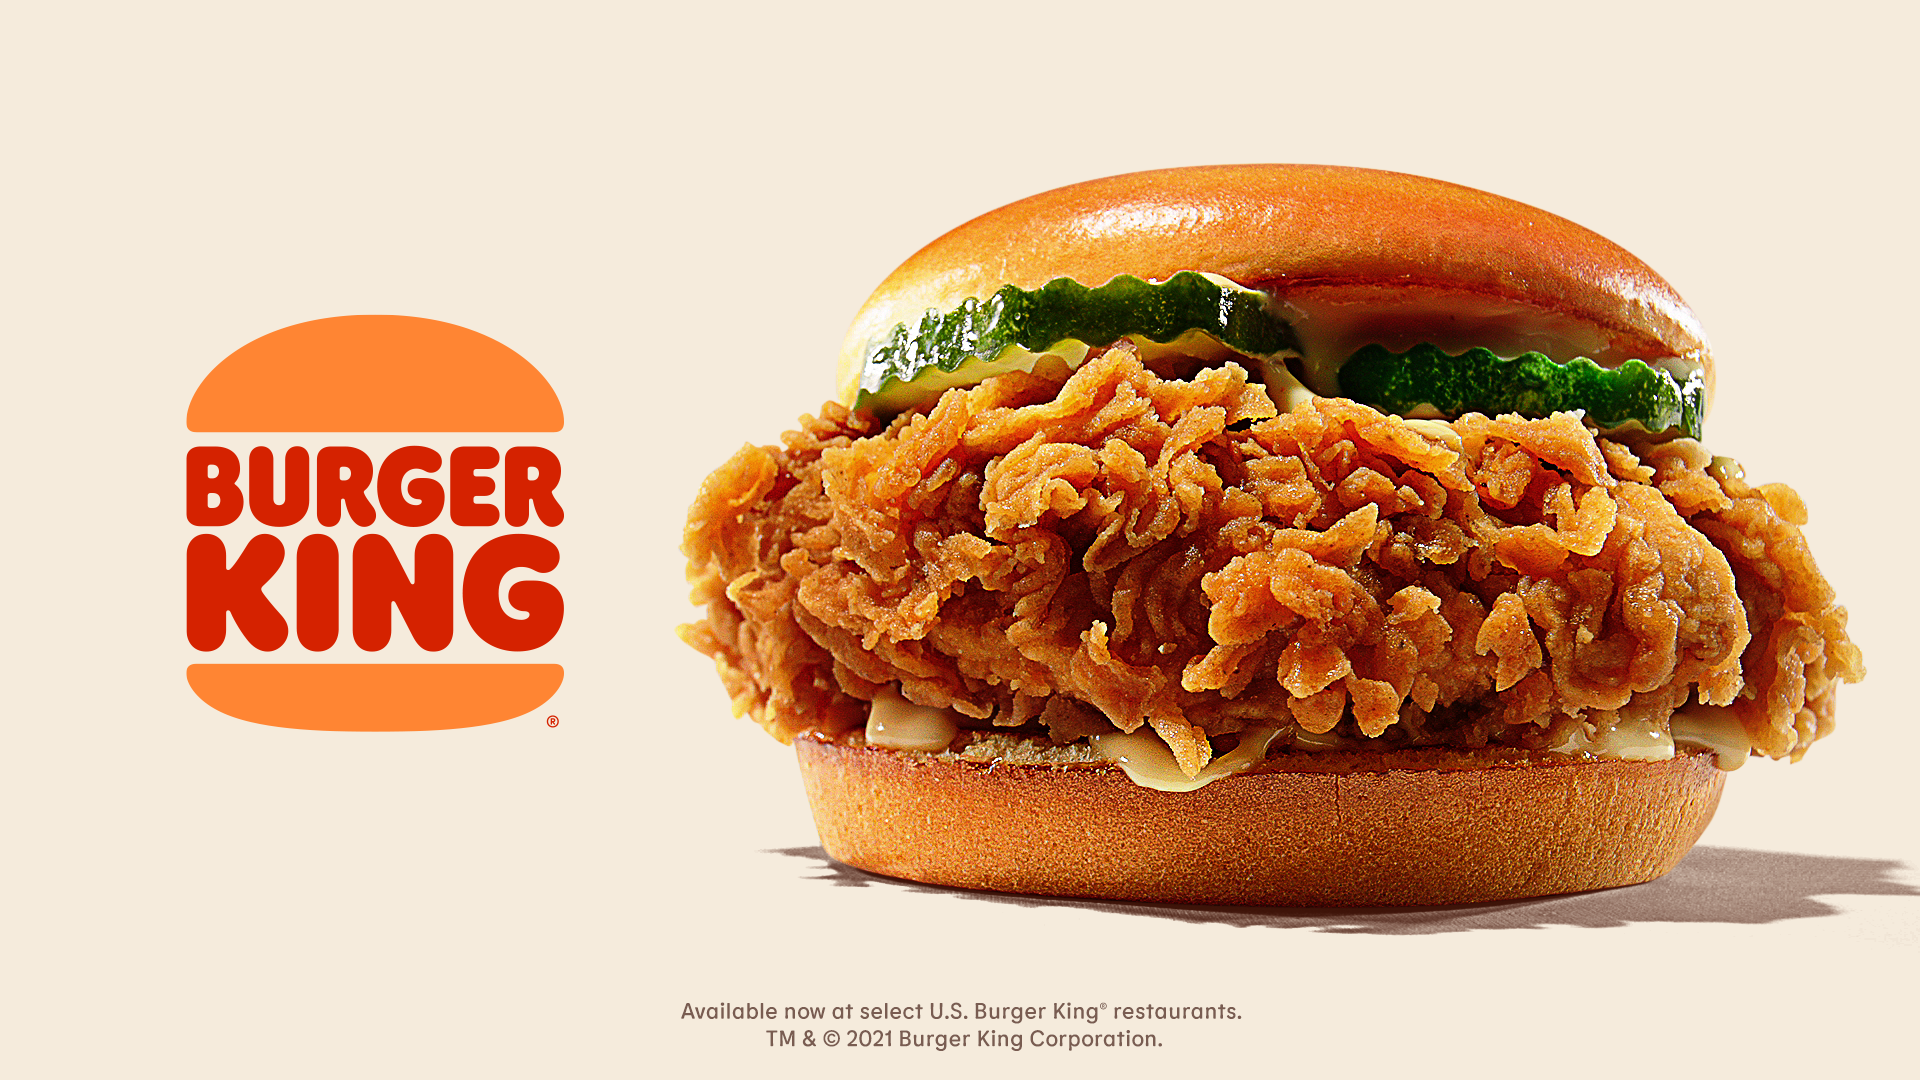 Burger King confirms new chicken sandwich for later this year, claims 'hand-breading' will set it apart